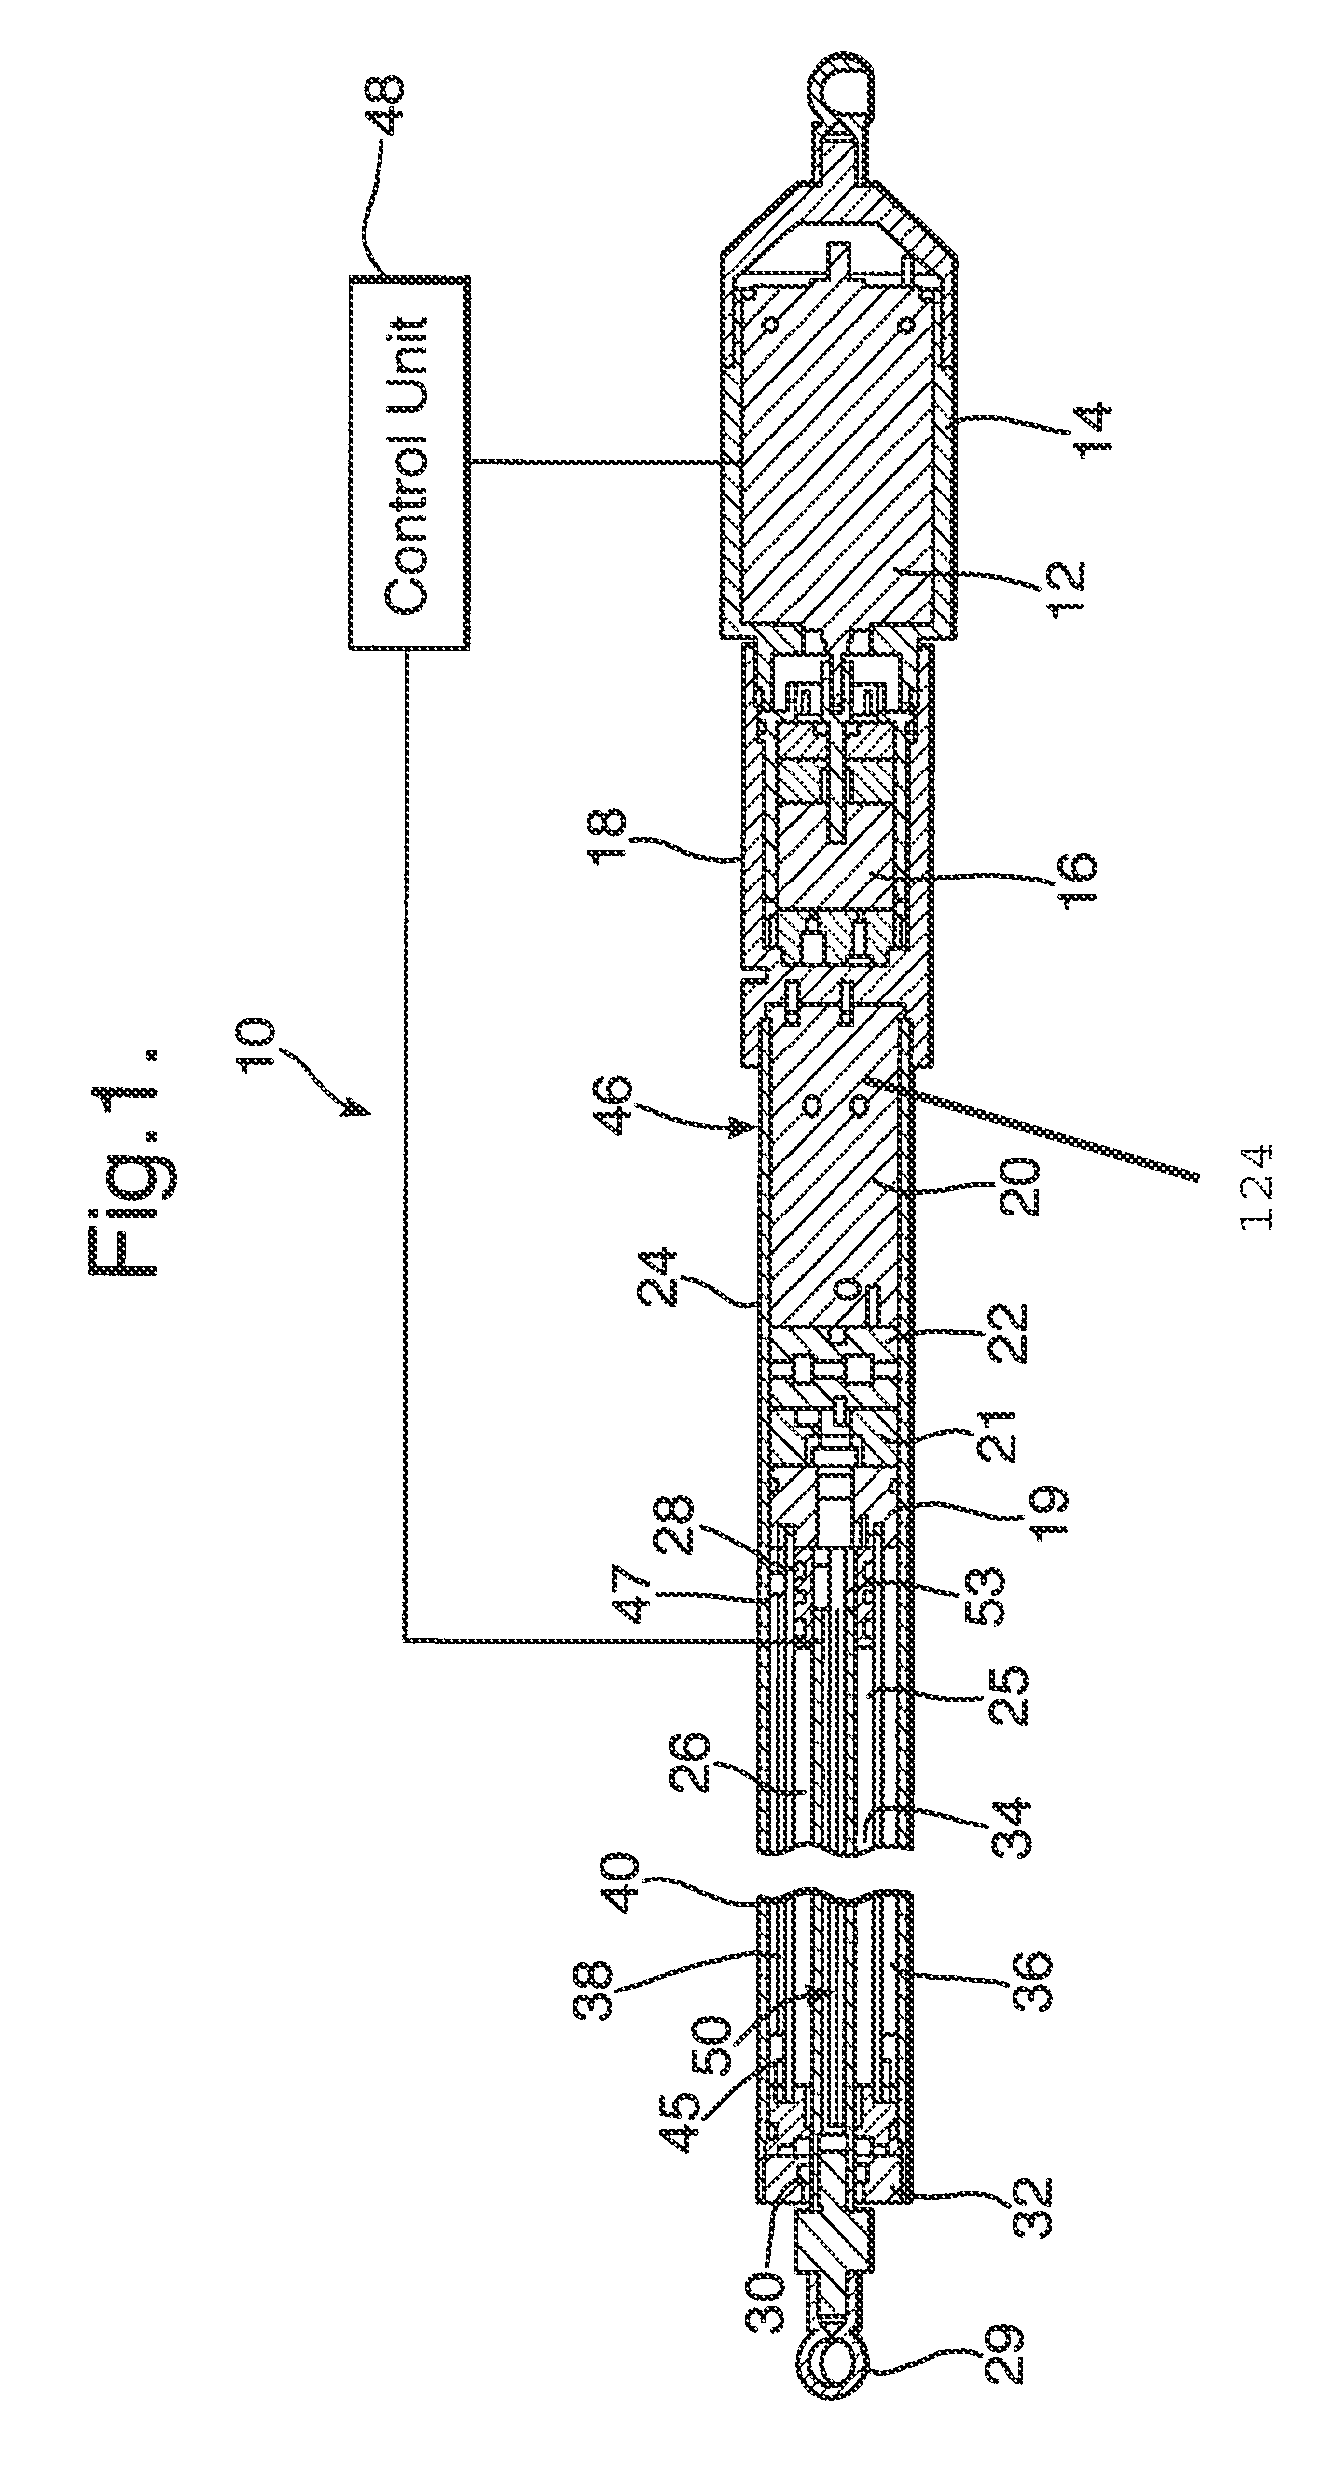 Apparatus and method for dual mode compact hydraulic system